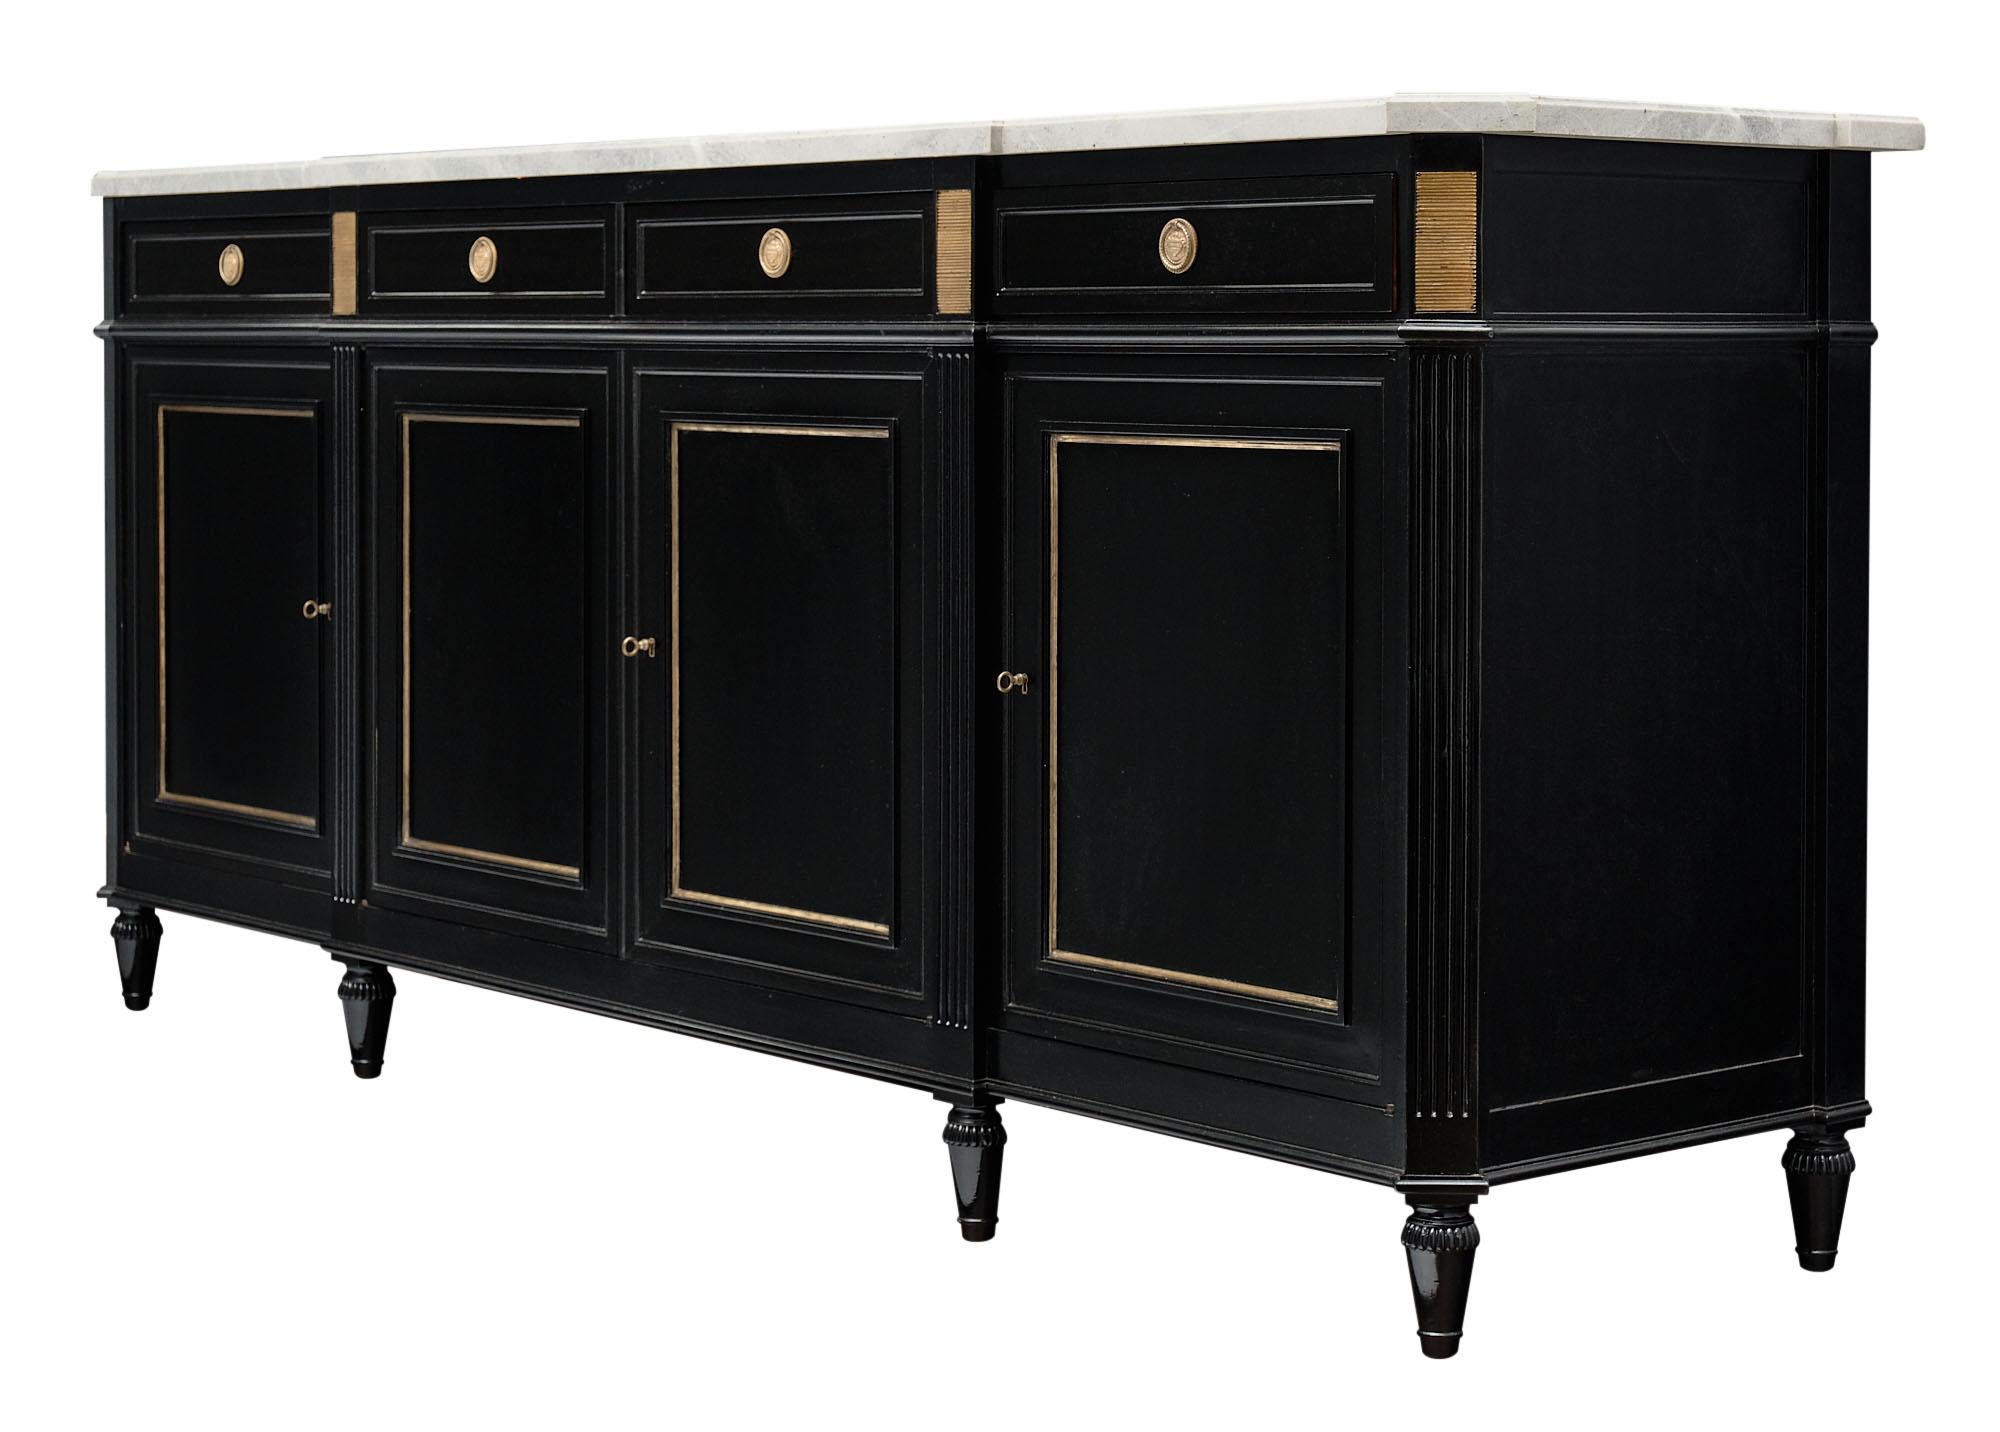 Louis XVI style antique French buffet made of mahogany and finished with an ebonized lustrous French polish. There is gilt brass hardware and trims throughout. The intact marble slab top has a beautiful gray tone and lovely veining throughout.